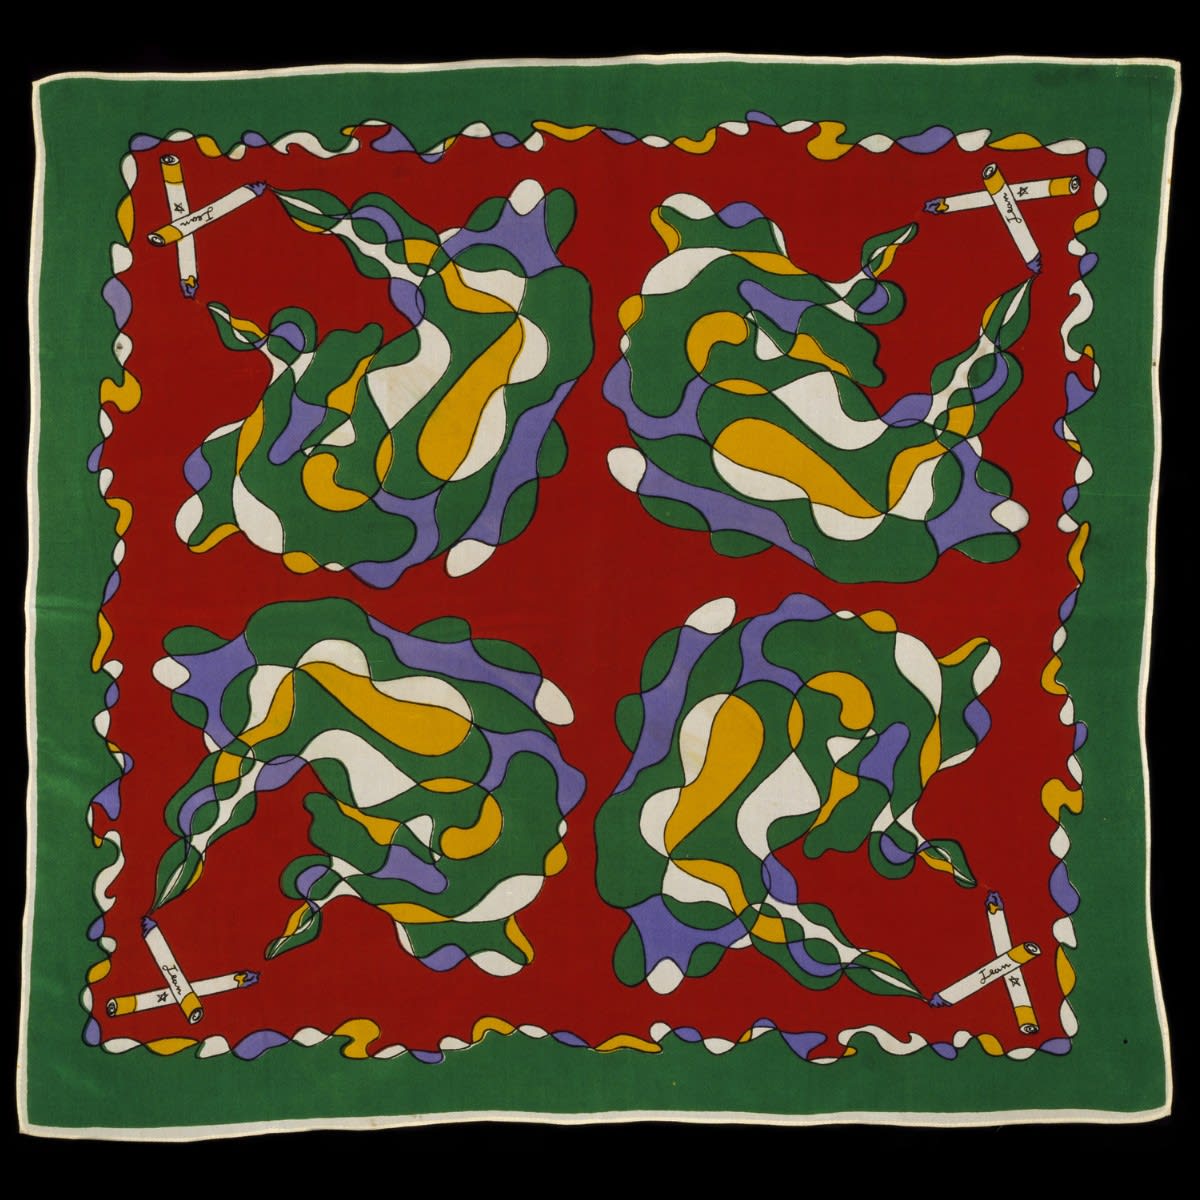 A splash of colour for your Twitter feed, in the form of two hand printed silk scarves designed by Jean Cocteau, around 1937-39.